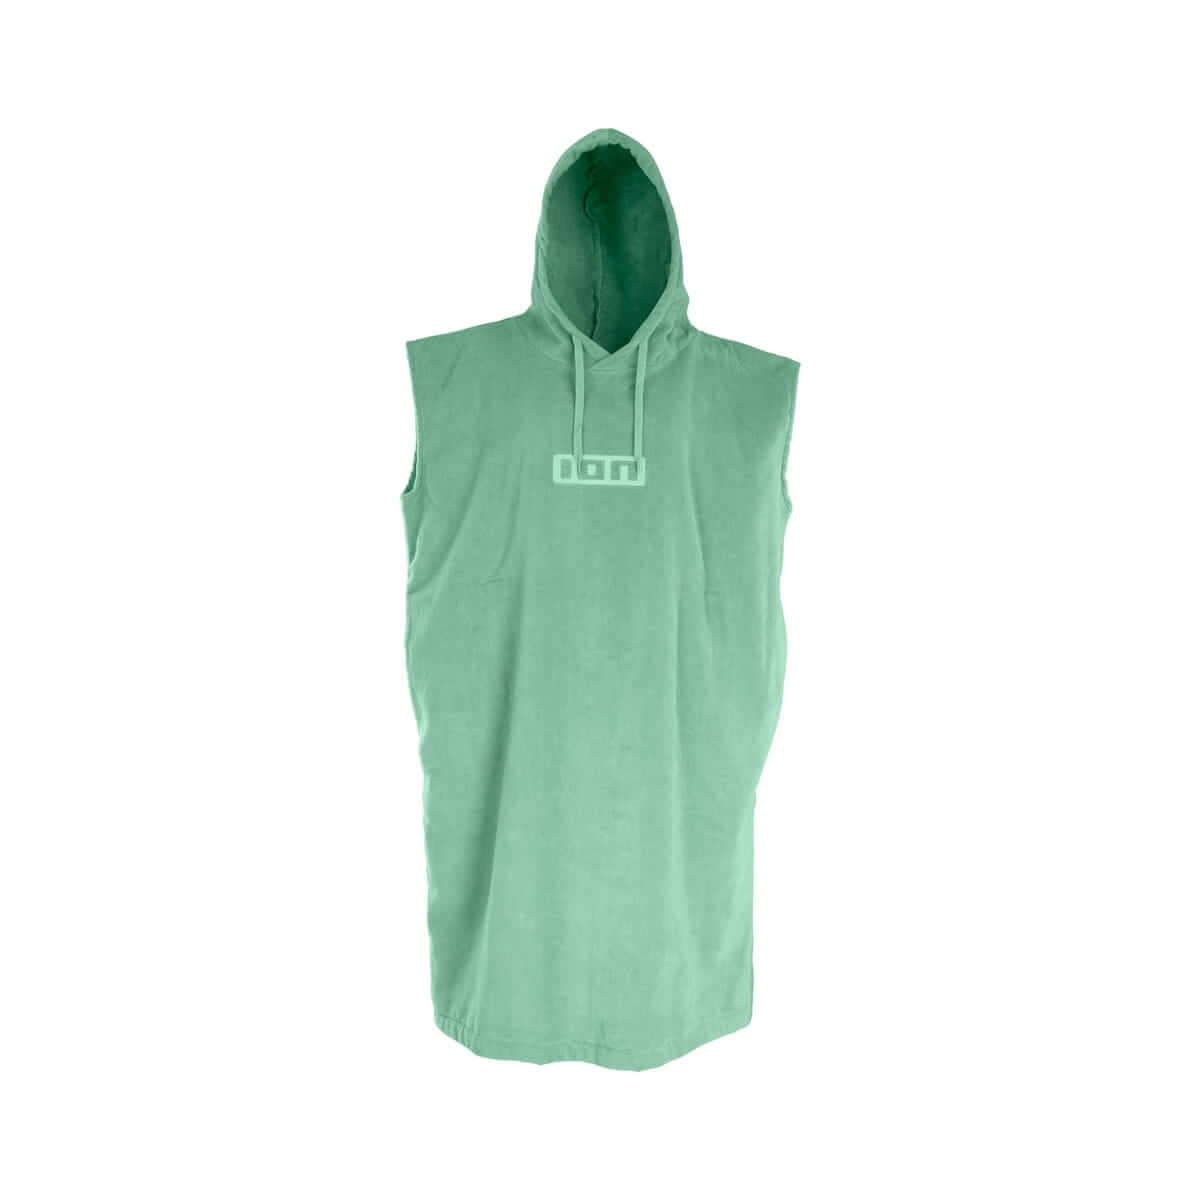 Poncho ION Grom - Neo Mint (1)